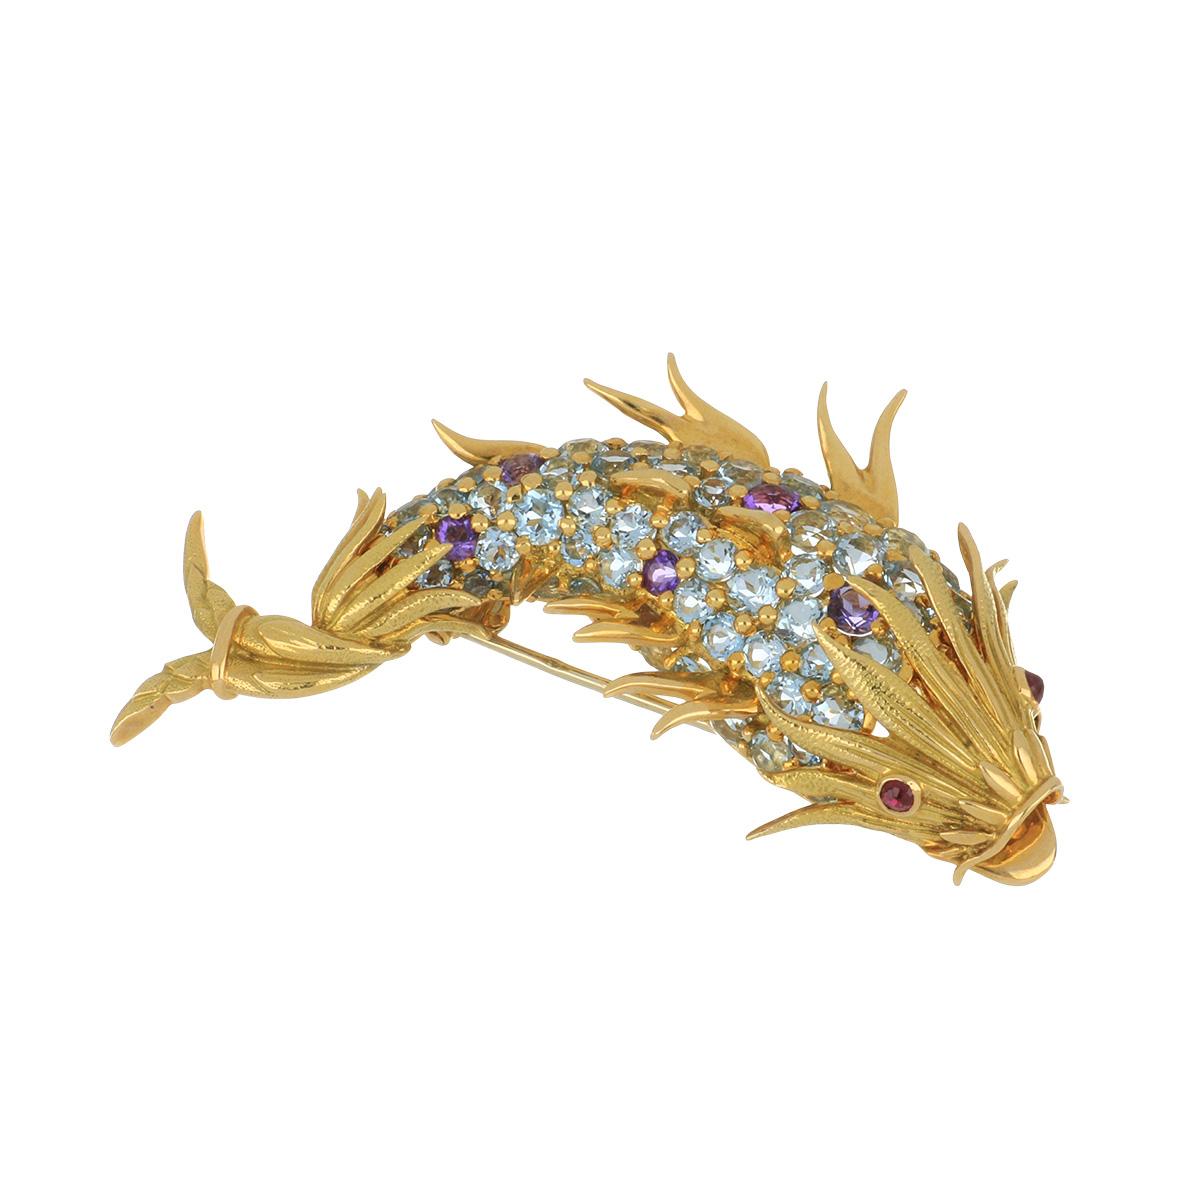 Important Mid-Century Tiffany & Co. Schlumberger 18K yellow gold gemstone fish pin.  Circa 1965.  There are 5.75 carats of aquamarines, 0.45 carats of amethysts, and 0.15 carats of rubies.
*Important due to the Time Period and Iconic Nature of the